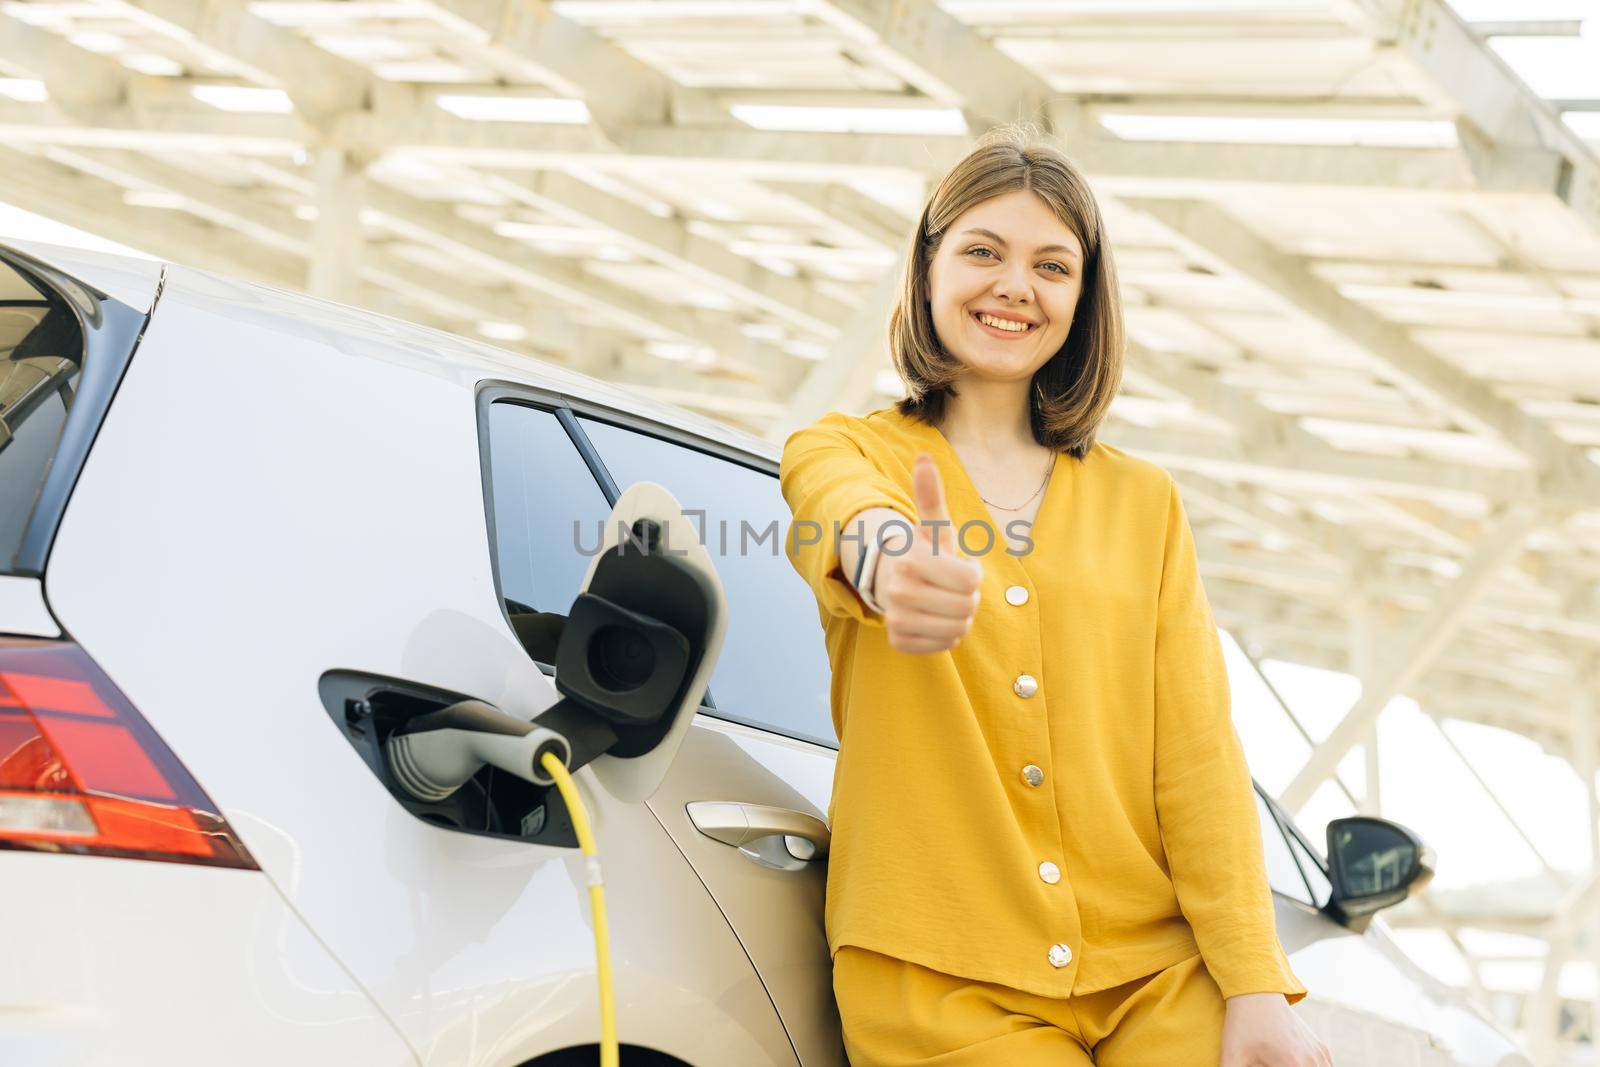 Woman standing on charging station looking at camera and showing thumb up. Businesswoman near electric vehicle outdoors. Eco-friendly modern green transport. Ecology and urban lifestyle